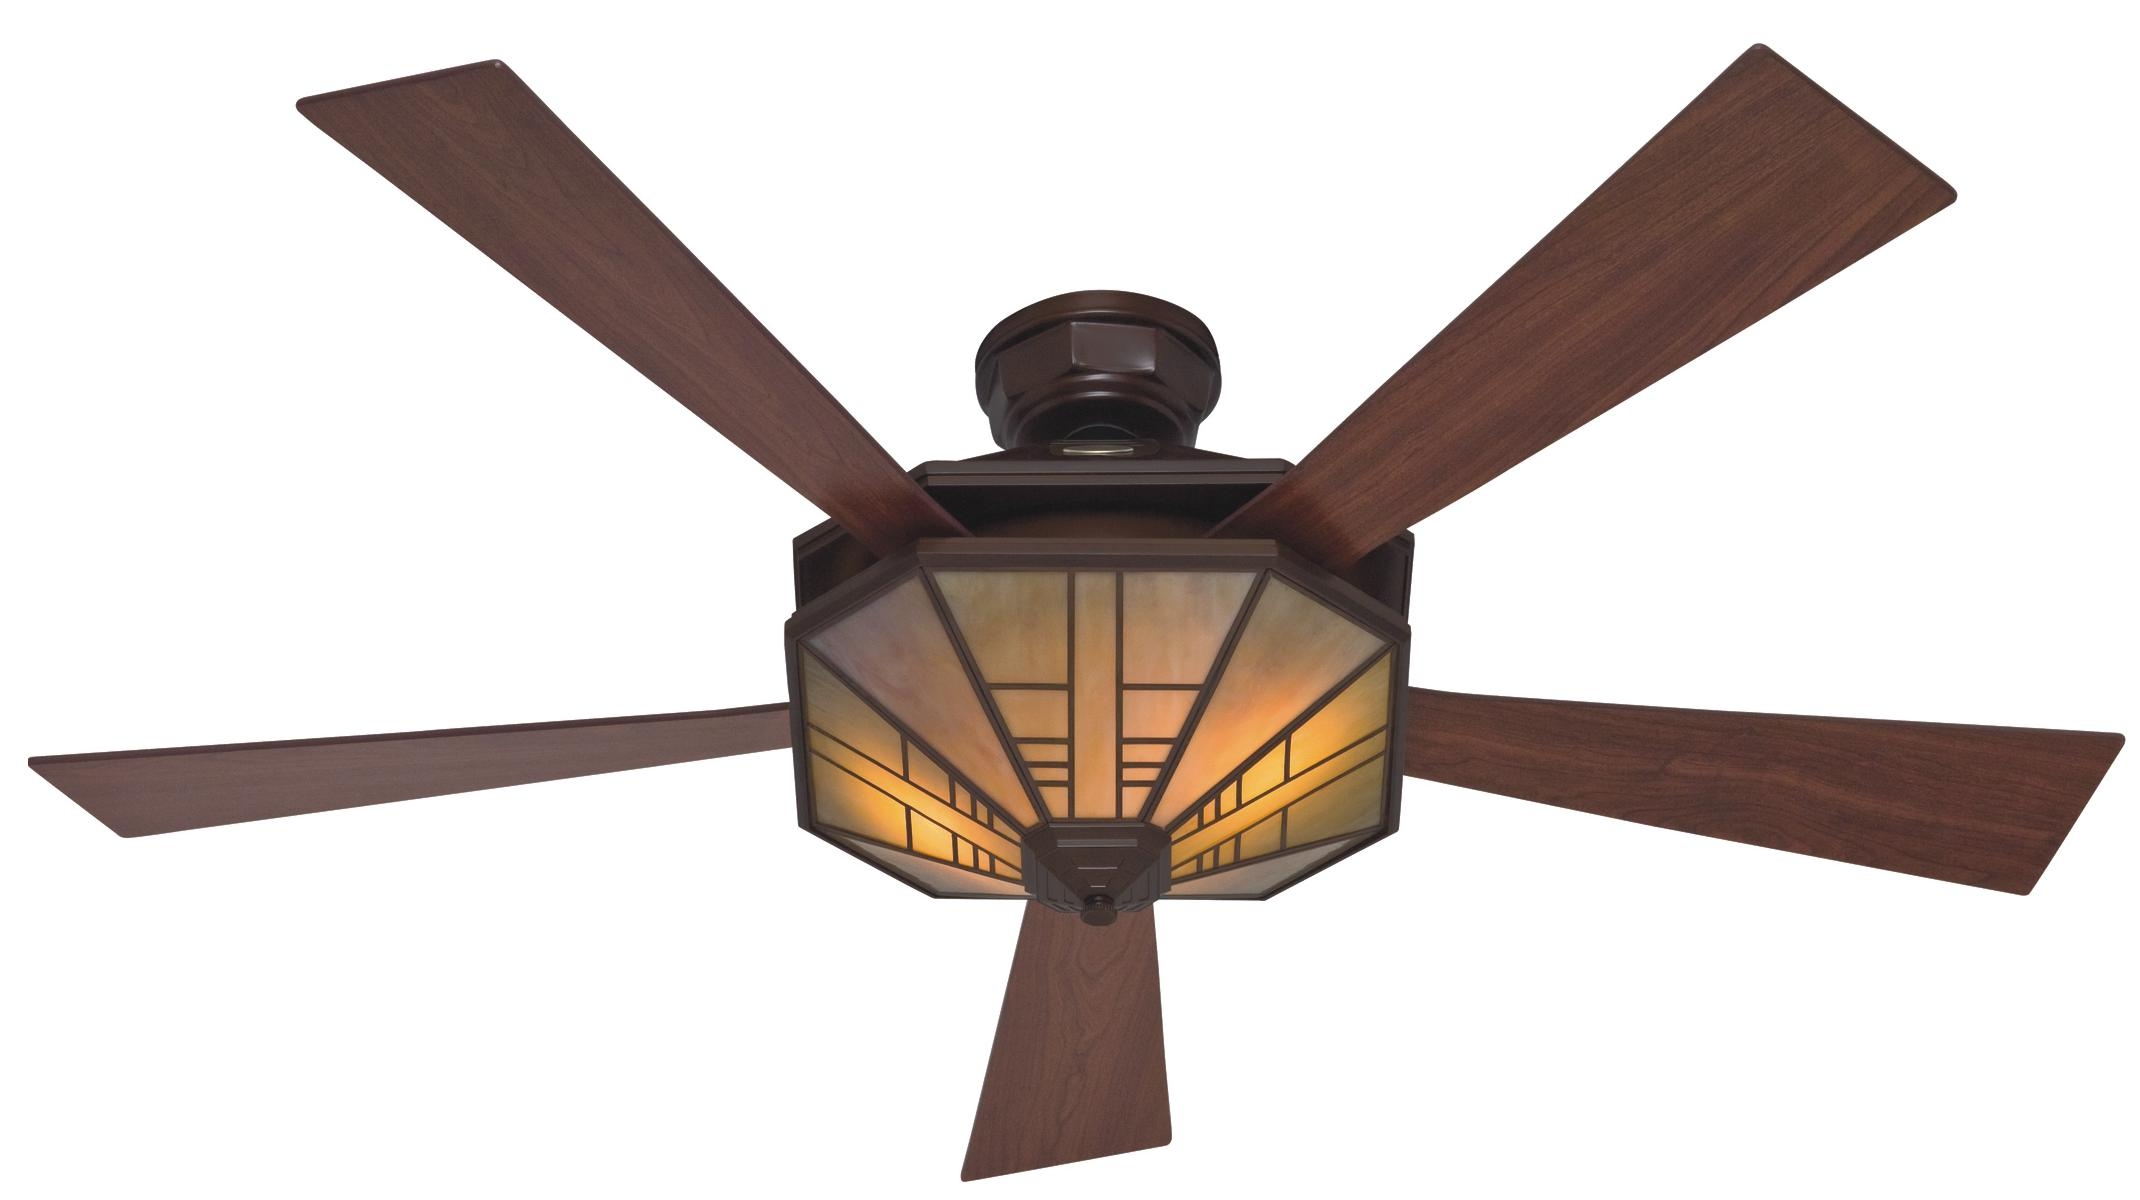 Mission Ceiling Fans With Lights2140 X 1200